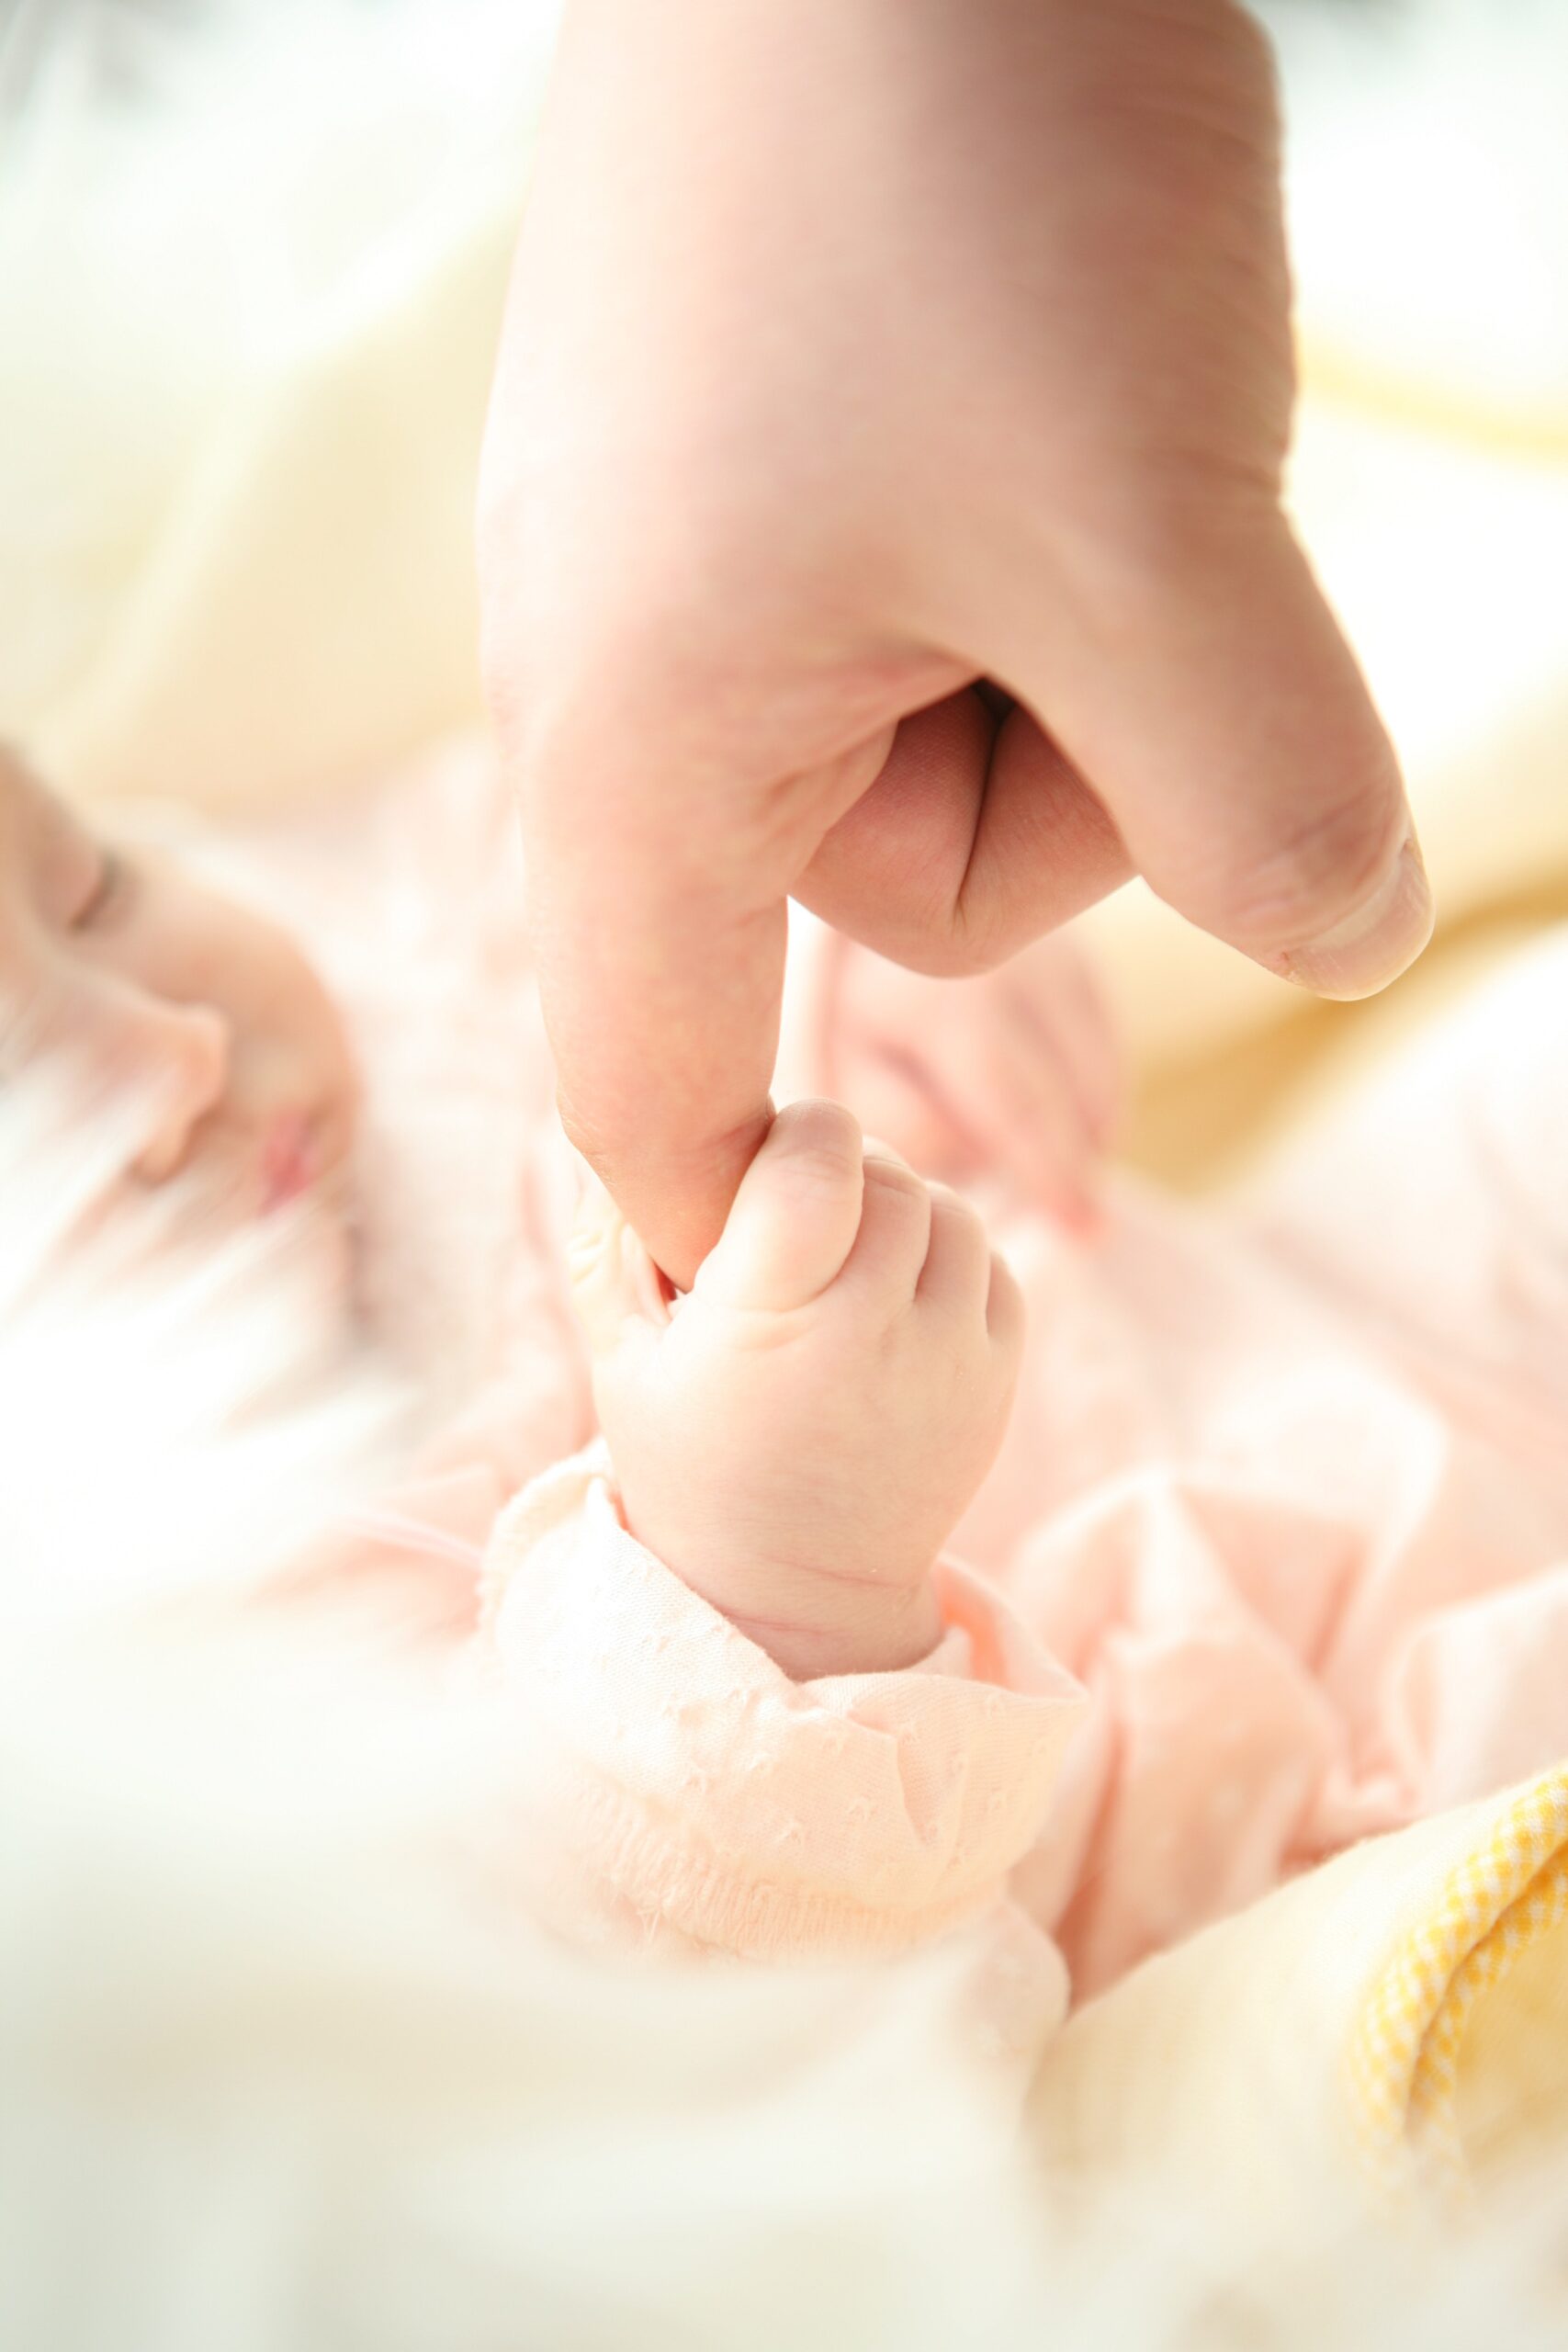 Baby holding person's finger